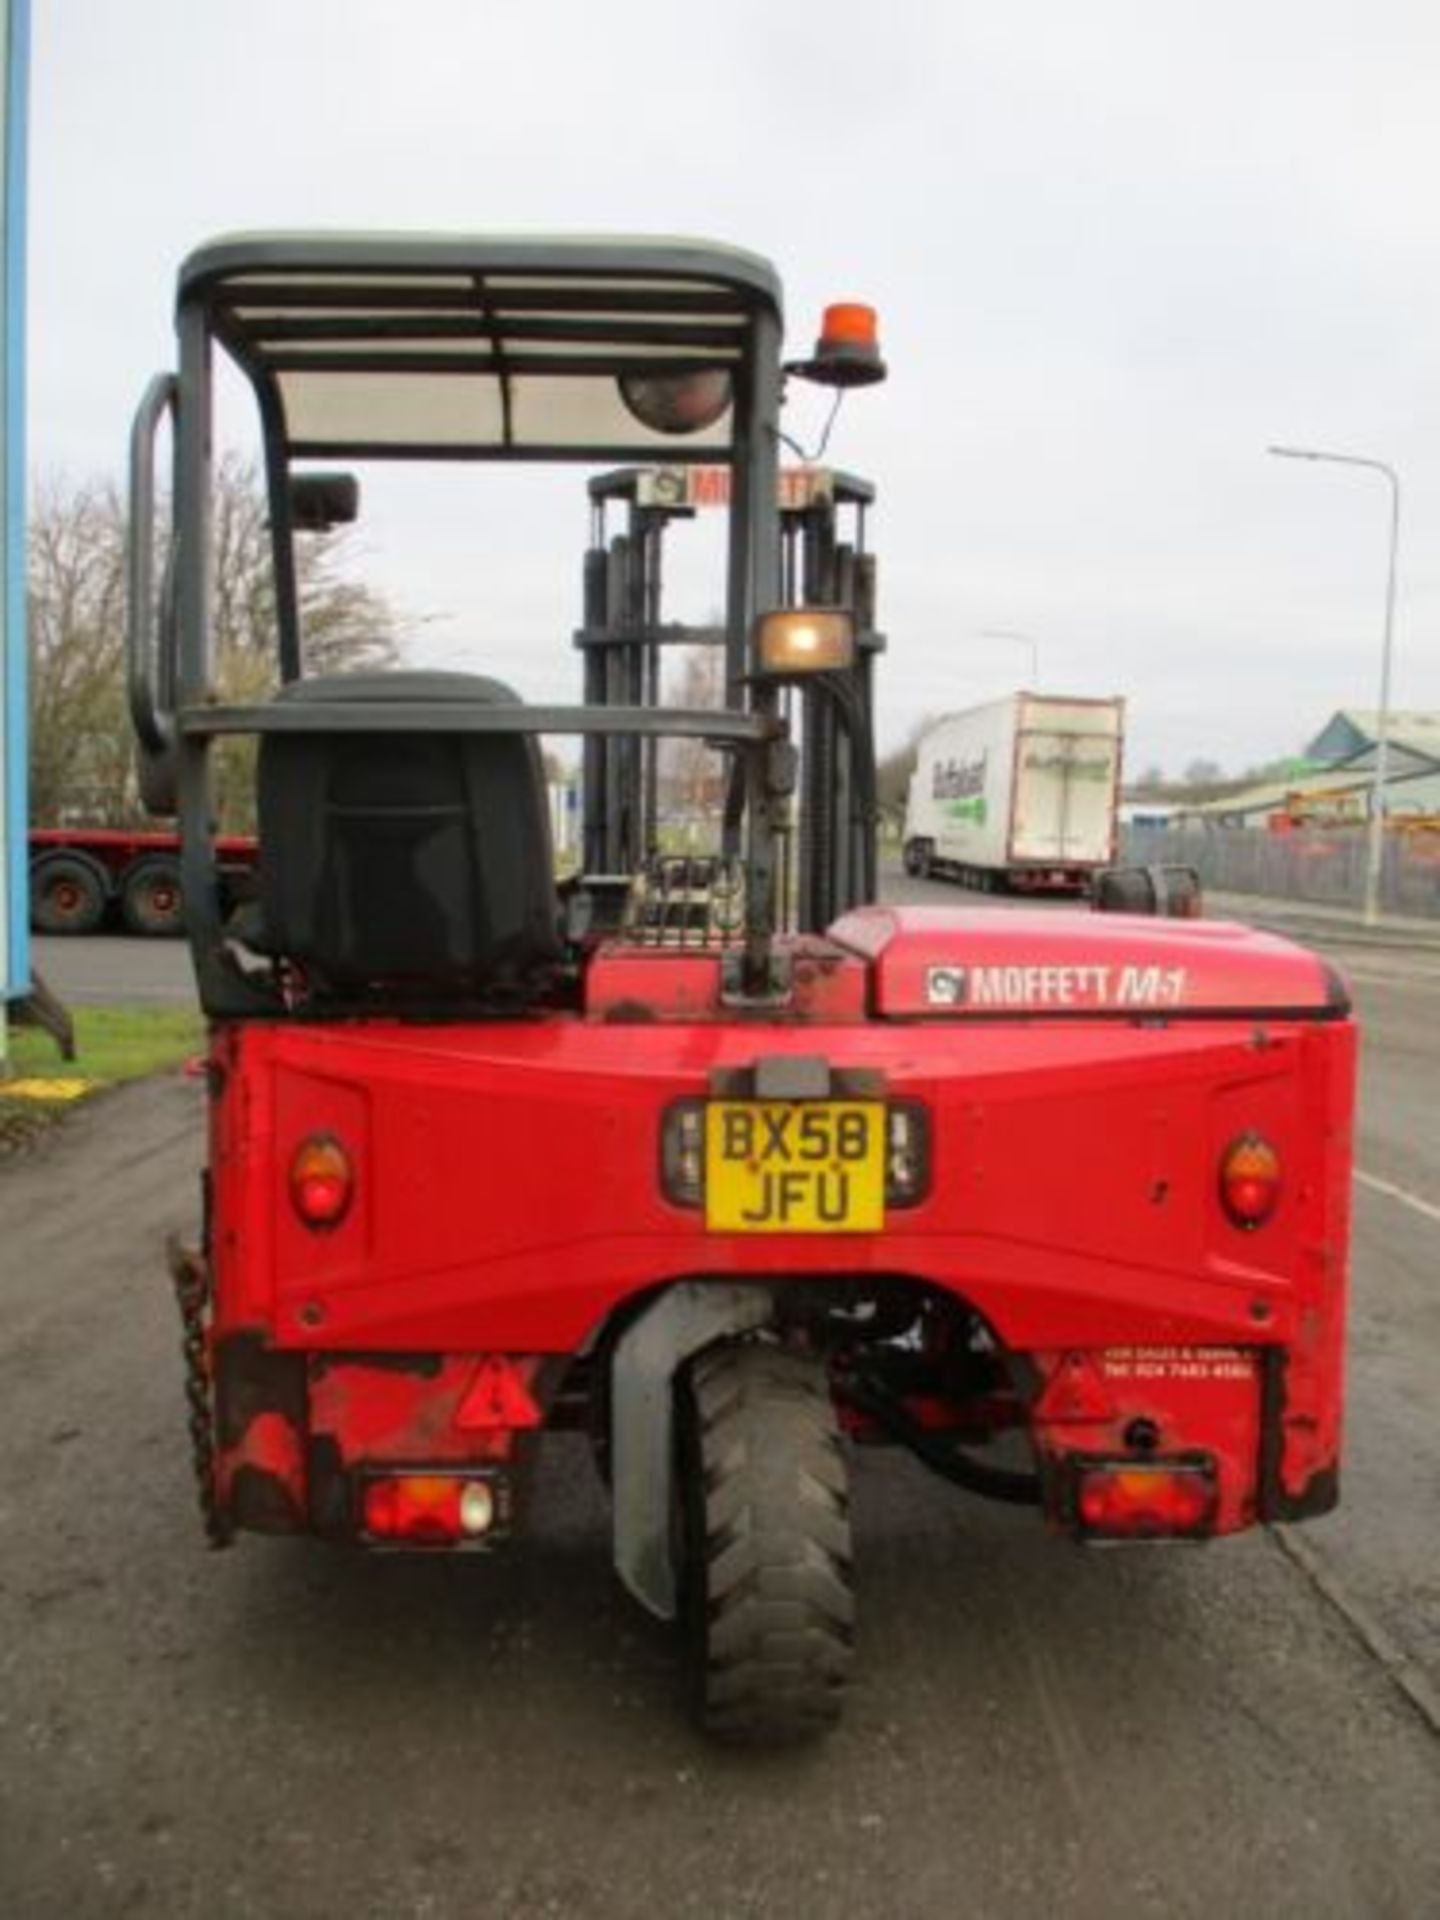 2009 MOFFETT MOUNTY M5 20.3 FORK LIFT FORKLIFT TRUCK MOUNTED LOLER DELIVERY - Image 5 of 8